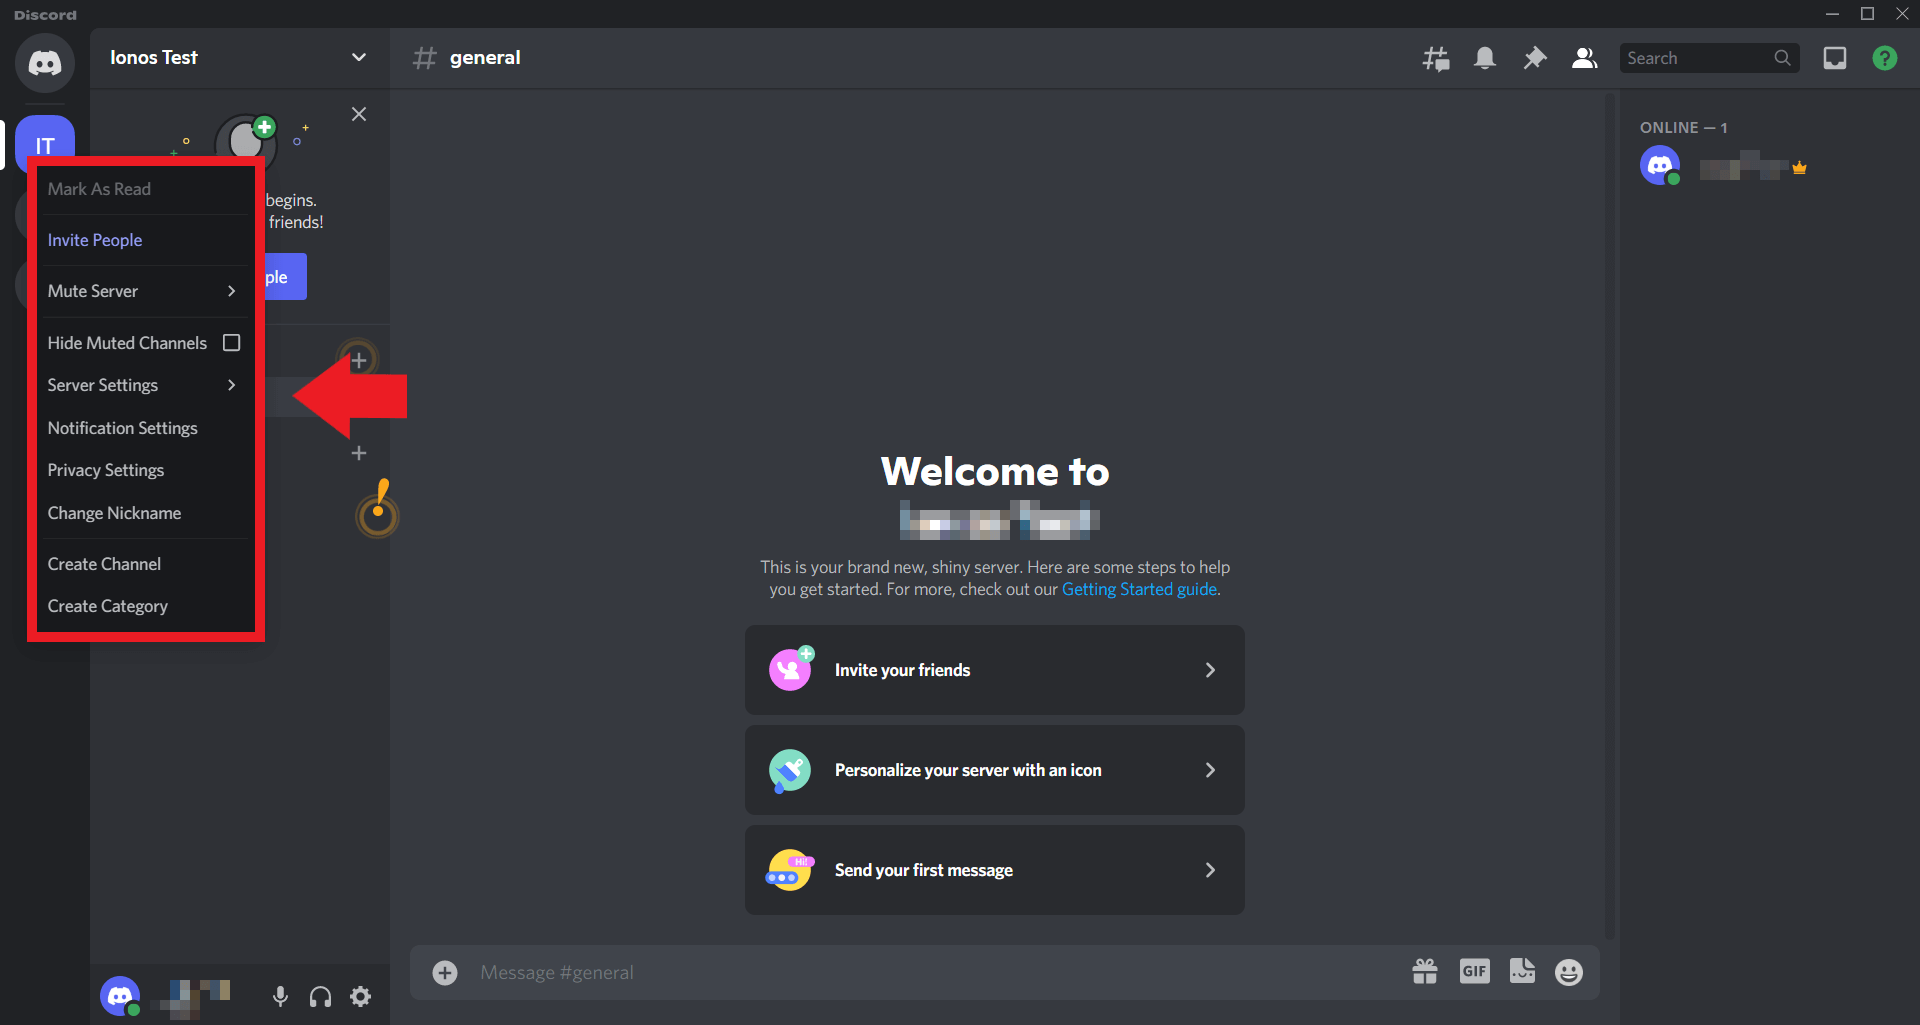 make a gaming or streamer discord server within 24 hours